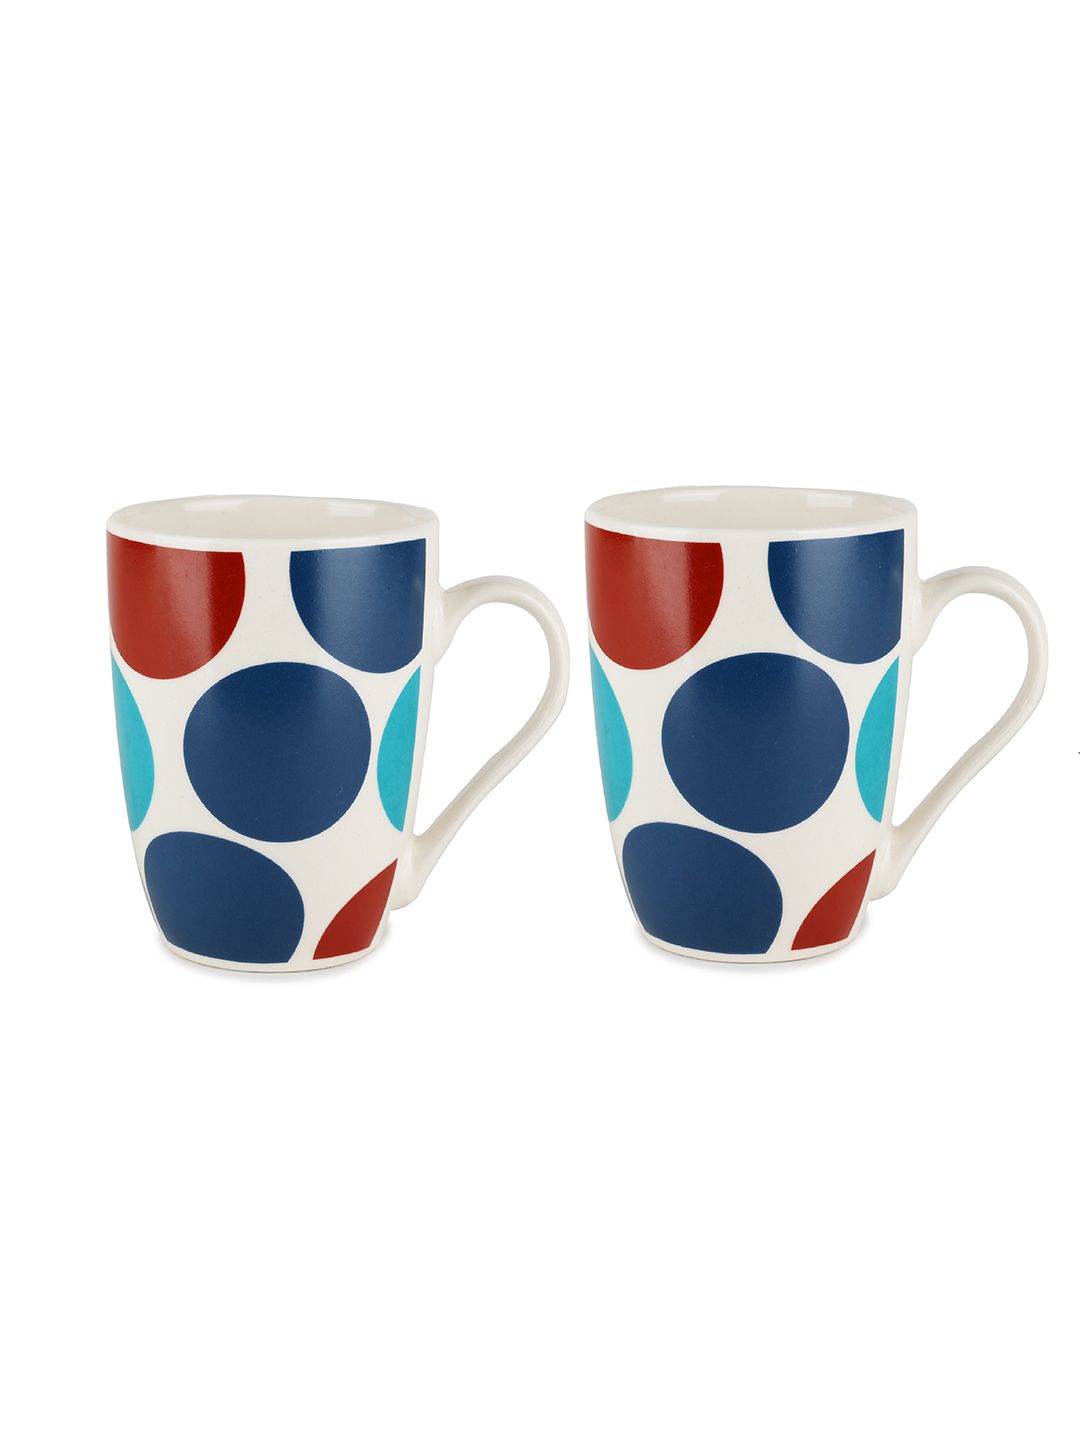 ZEVORA White & Red Hand Painted Printed Ceramic Glossy Mugs Set of Cups and Mugs Price in India